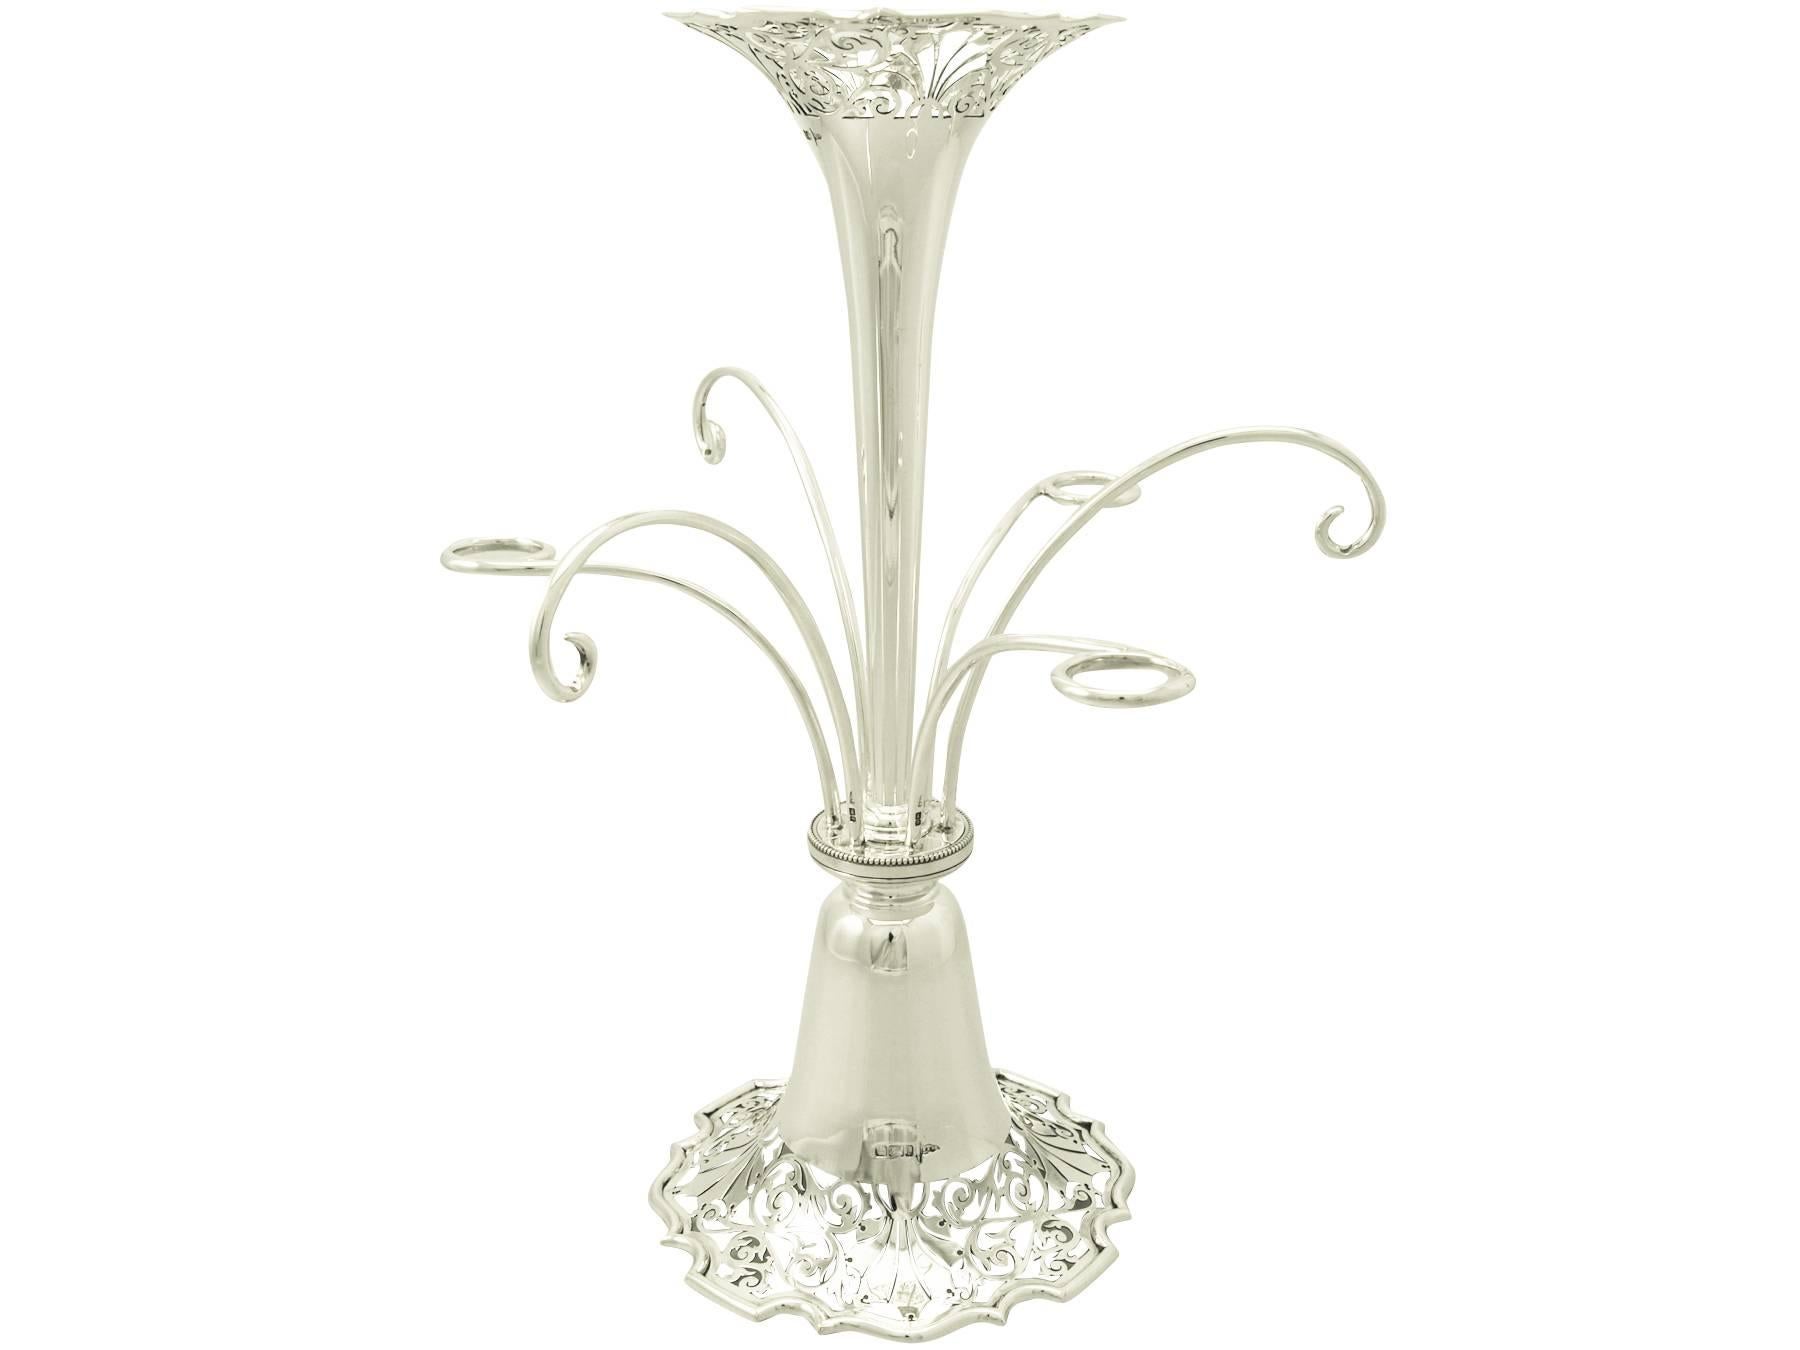 An exceptional, large and impressive antique Edwardian English sterling silver centrepiece; part of our ornamental silverware collection.

This exceptional and large antique Edwardian sterling silver epergne/centrepiece has a plain, tapering form